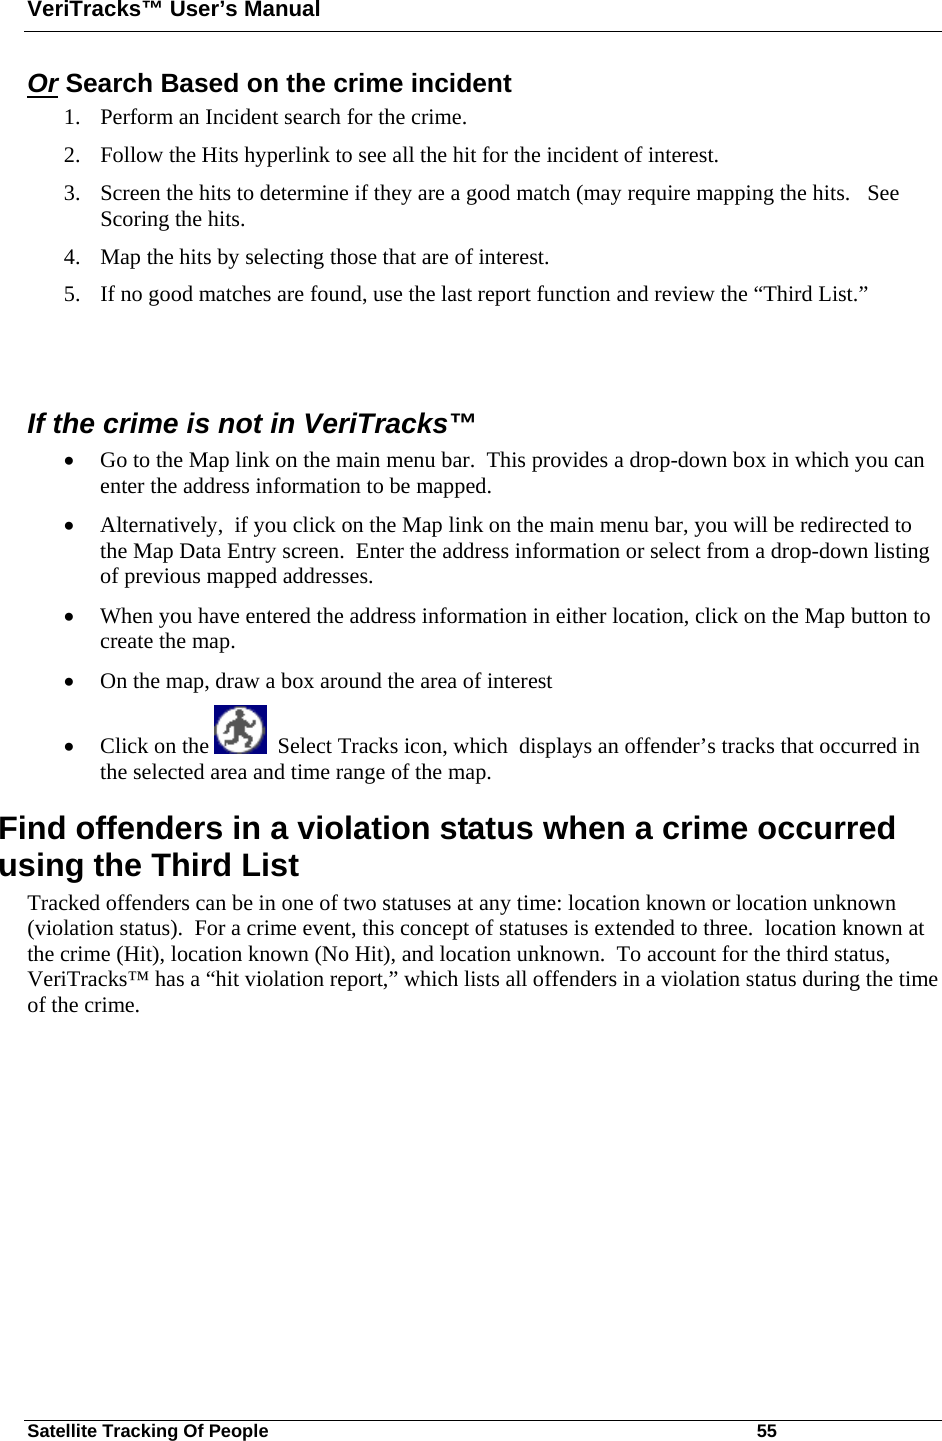 VeriTracks™ User’s Manual Satellite Tracking Of People       55 Or Search Based on the crime incident  1. Perform an Incident search for the crime.  2. Follow the Hits hyperlink to see all the hit for the incident of interest. 3. Screen the hits to determine if they are a good match (may require mapping the hits.   See Scoring the hits. 4. Map the hits by selecting those that are of interest.   5. If no good matches are found, use the last report function and review the “Third List.”   If the crime is not in VeriTracks™ • Go to the Map link on the main menu bar.  This provides a drop-down box in which you can enter the address information to be mapped. • Alternatively,  if you click on the Map link on the main menu bar, you will be redirected to the Map Data Entry screen.  Enter the address information or select from a drop-down listing of previous mapped addresses. • When you have entered the address information in either location, click on the Map button to create the map. • On the map, draw a box around the area of interest  • Click on the    Select Tracks icon, which  displays an offender’s tracks that occurred in the selected area and time range of the map.  Find offenders in a violation status when a crime occurred using the Third List Tracked offenders can be in one of two statuses at any time: location known or location unknown (violation status).  For a crime event, this concept of statuses is extended to three.  location known at the crime (Hit), location known (No Hit), and location unknown.  To account for the third status, VeriTracks™ has a “hit violation report,” which lists all offenders in a violation status during the time of the crime. 